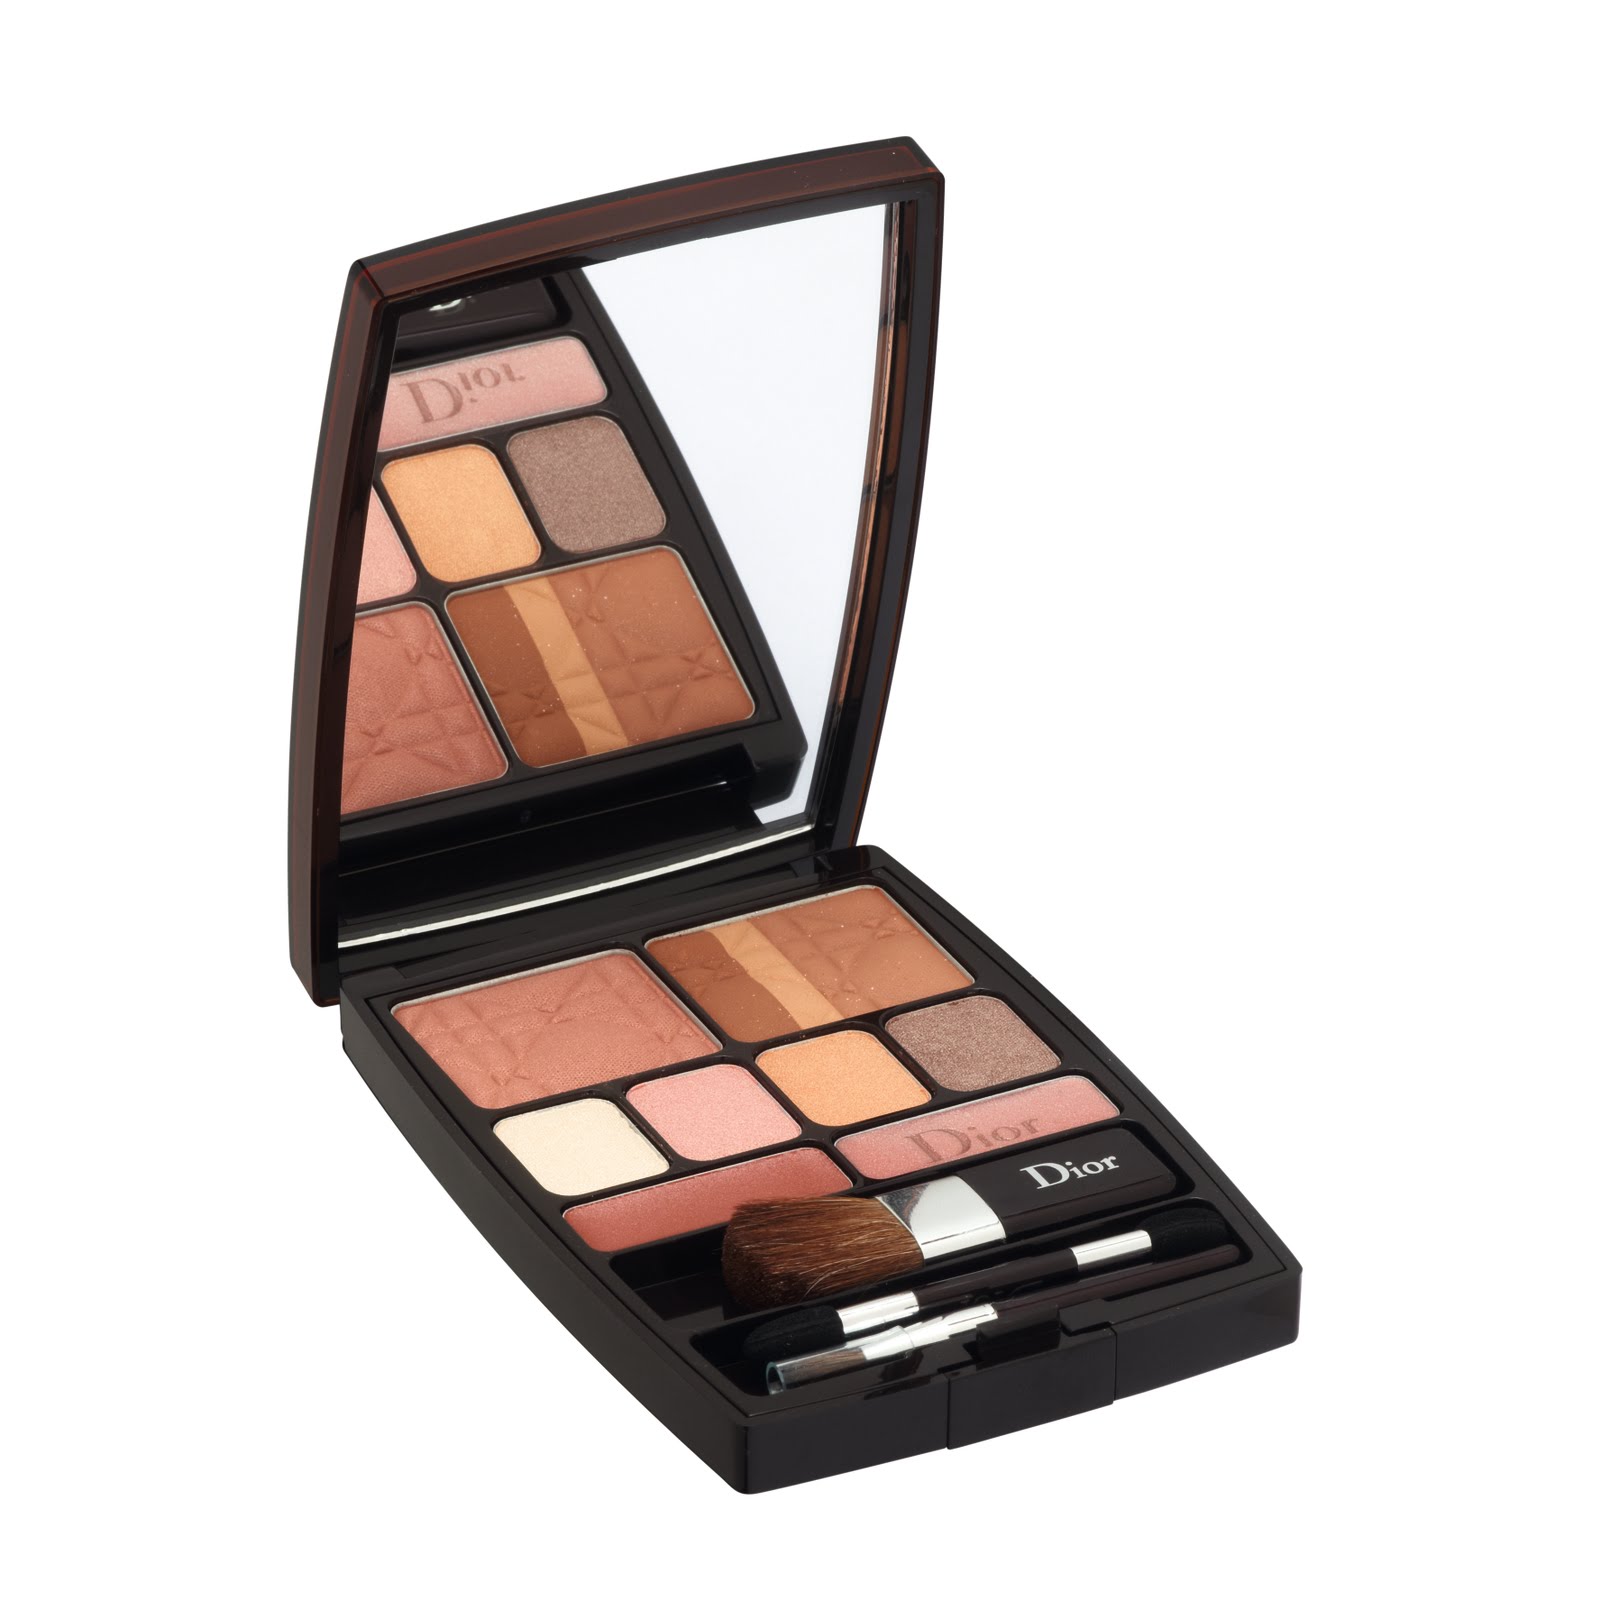 Holiday Time Dior Voyage Sun Couture Palette at Duty Free